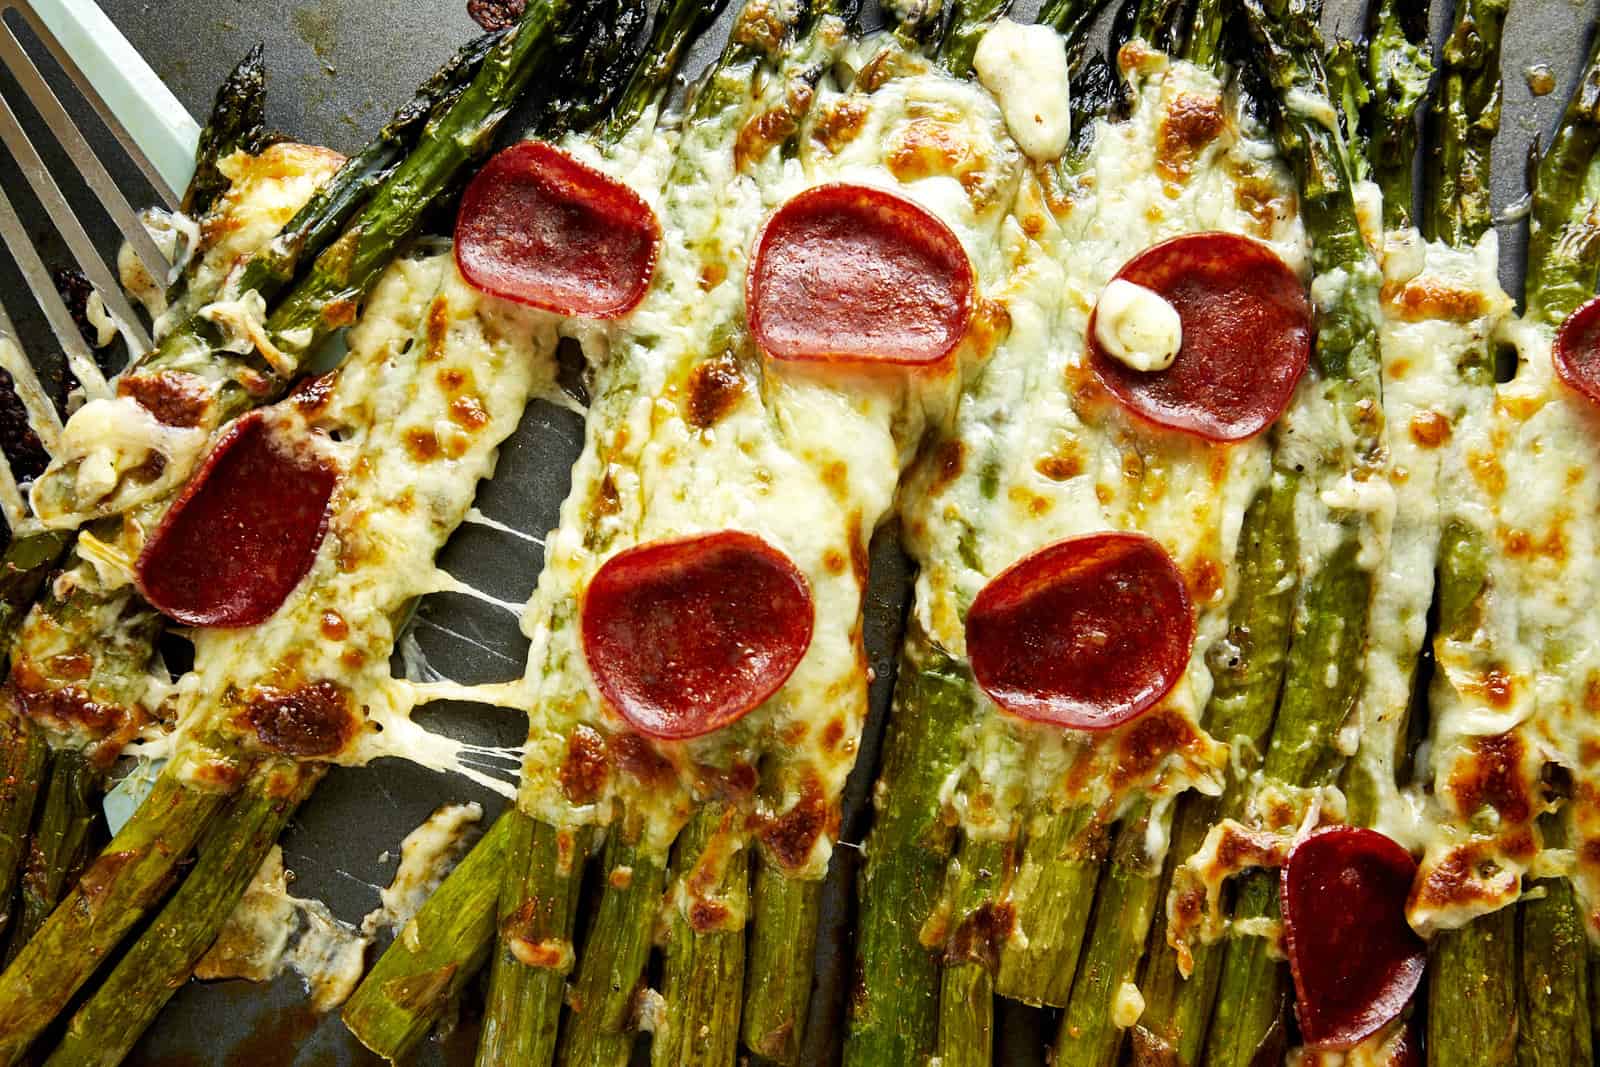 Pizza-flavored oven baked asparagus topped with pepperoni.